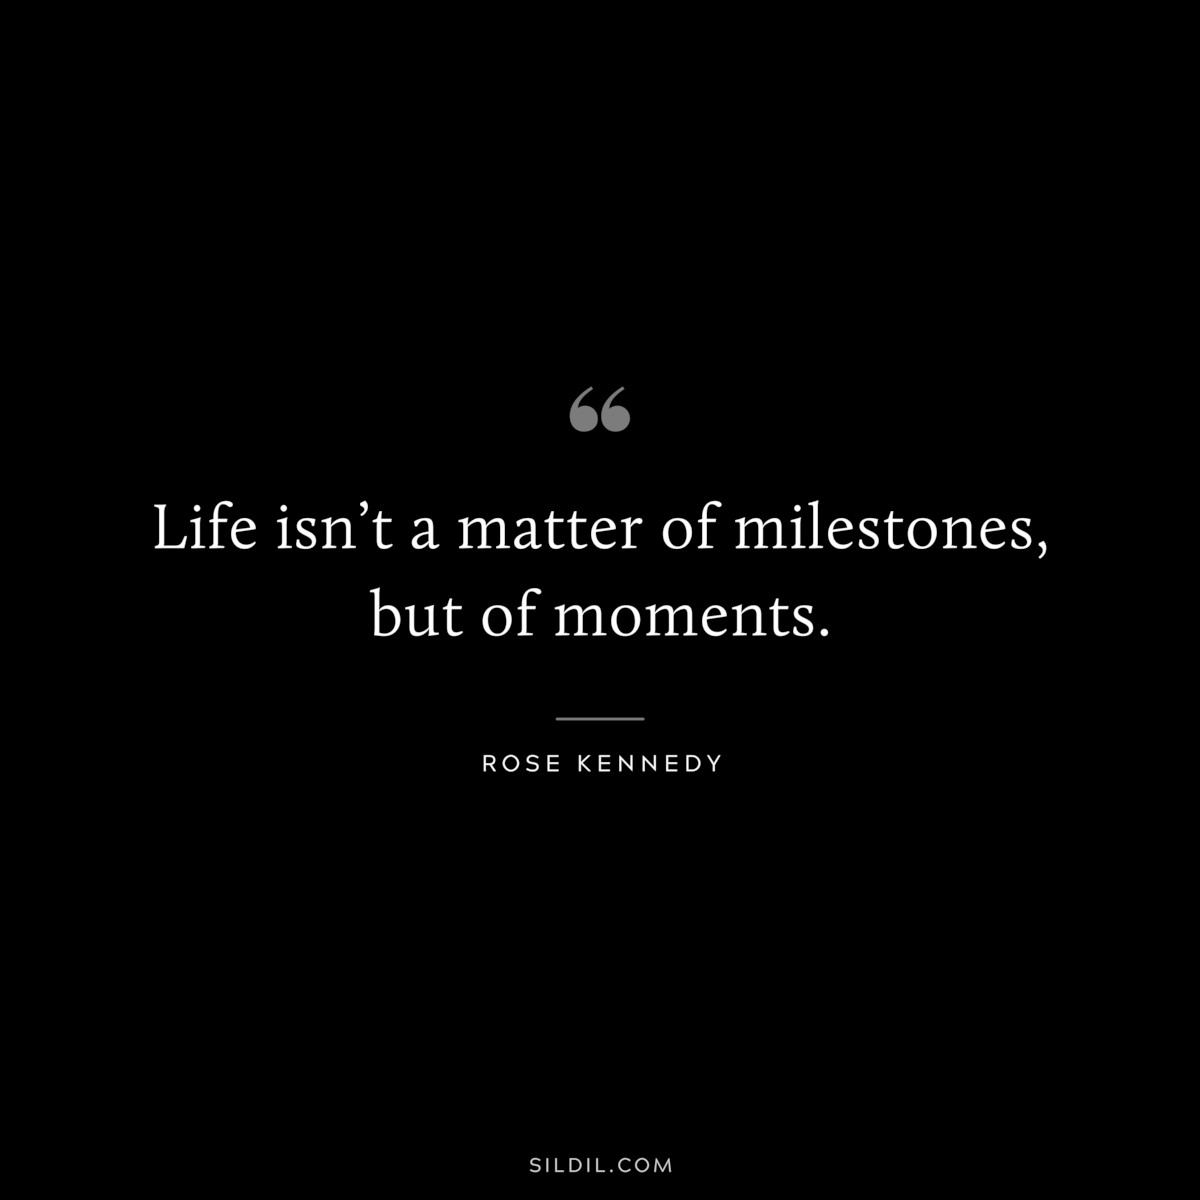 Life isn’t a matter of milestones, but of moments. ― Rose Kennedy